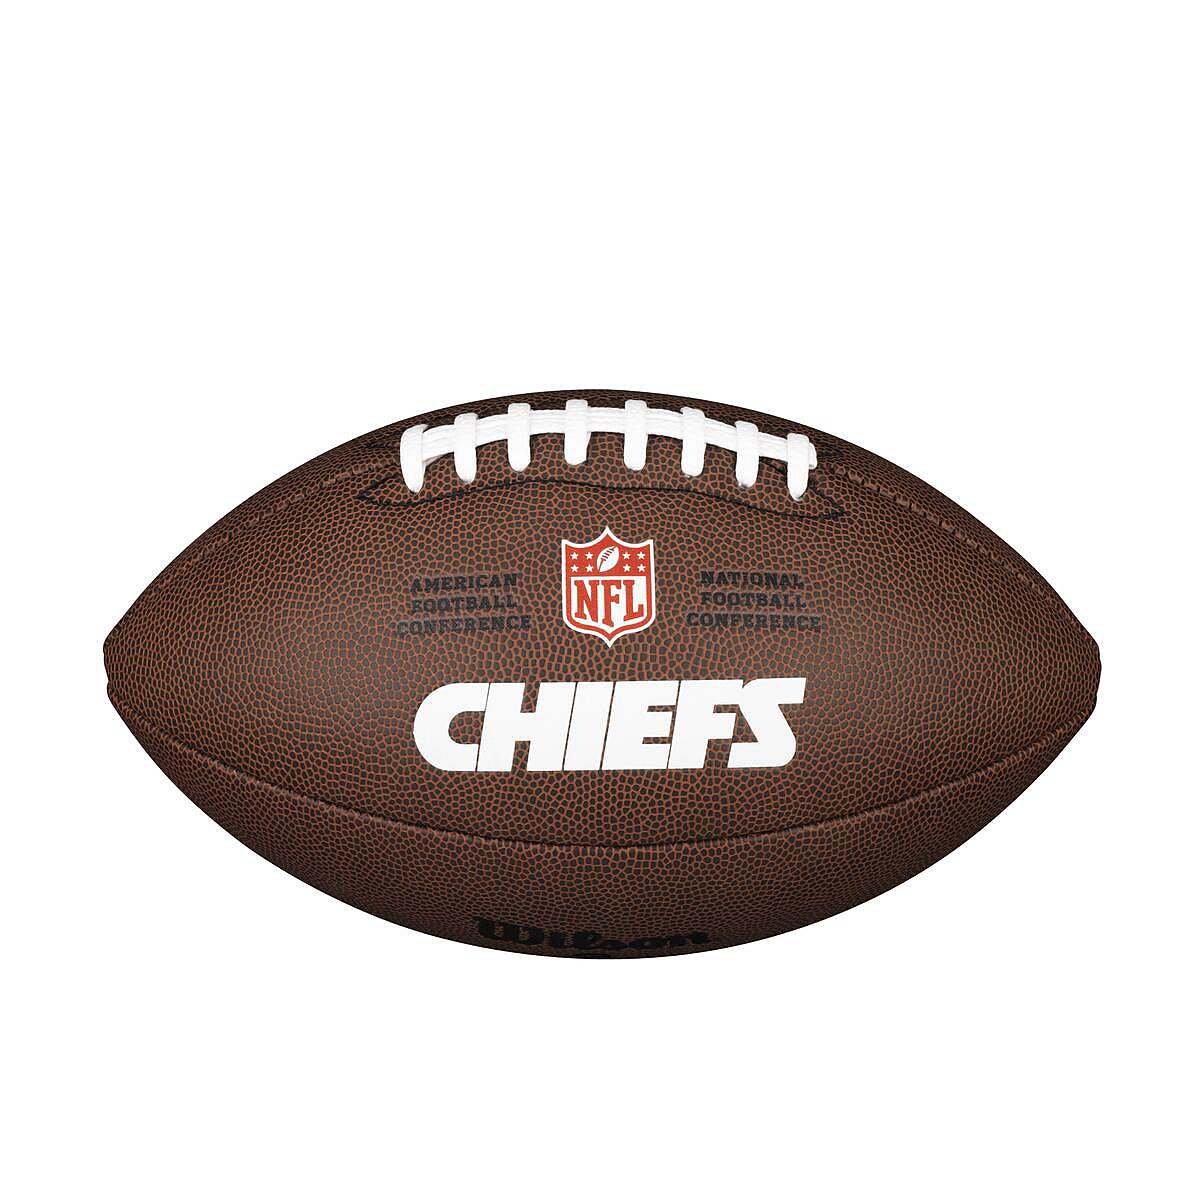 Wilson Nfl Licensed Official Football Kansas City Chiefs, Brown